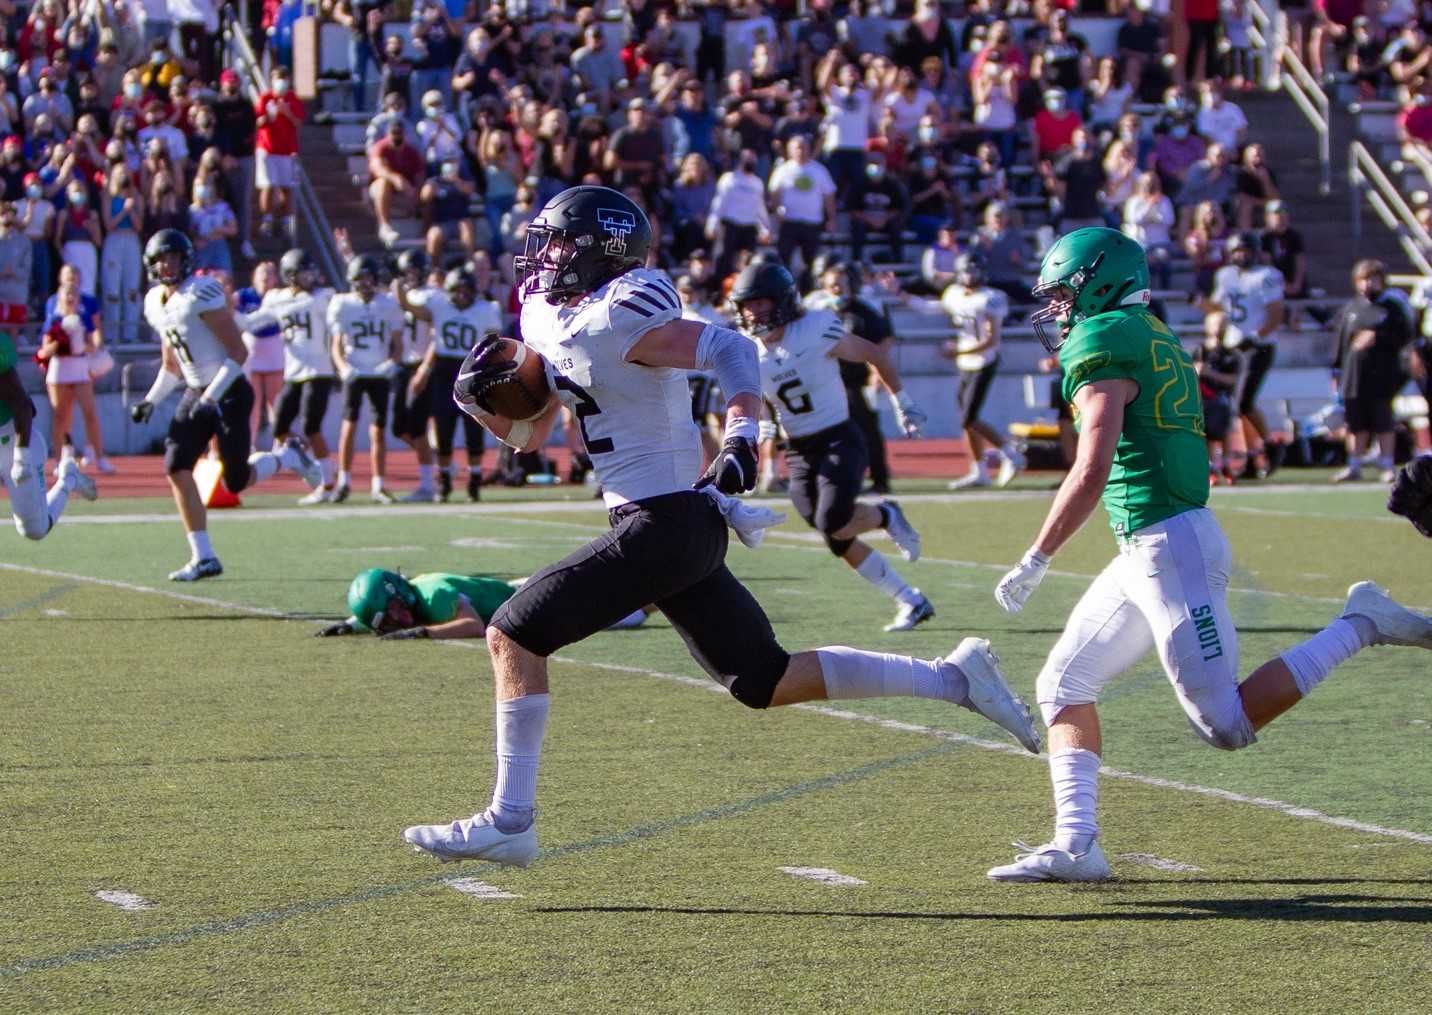 Tualatin's Cole Prusia had seven catches for 188 yards and three touchdowns Saturday. (Photo by Brad Cantor)